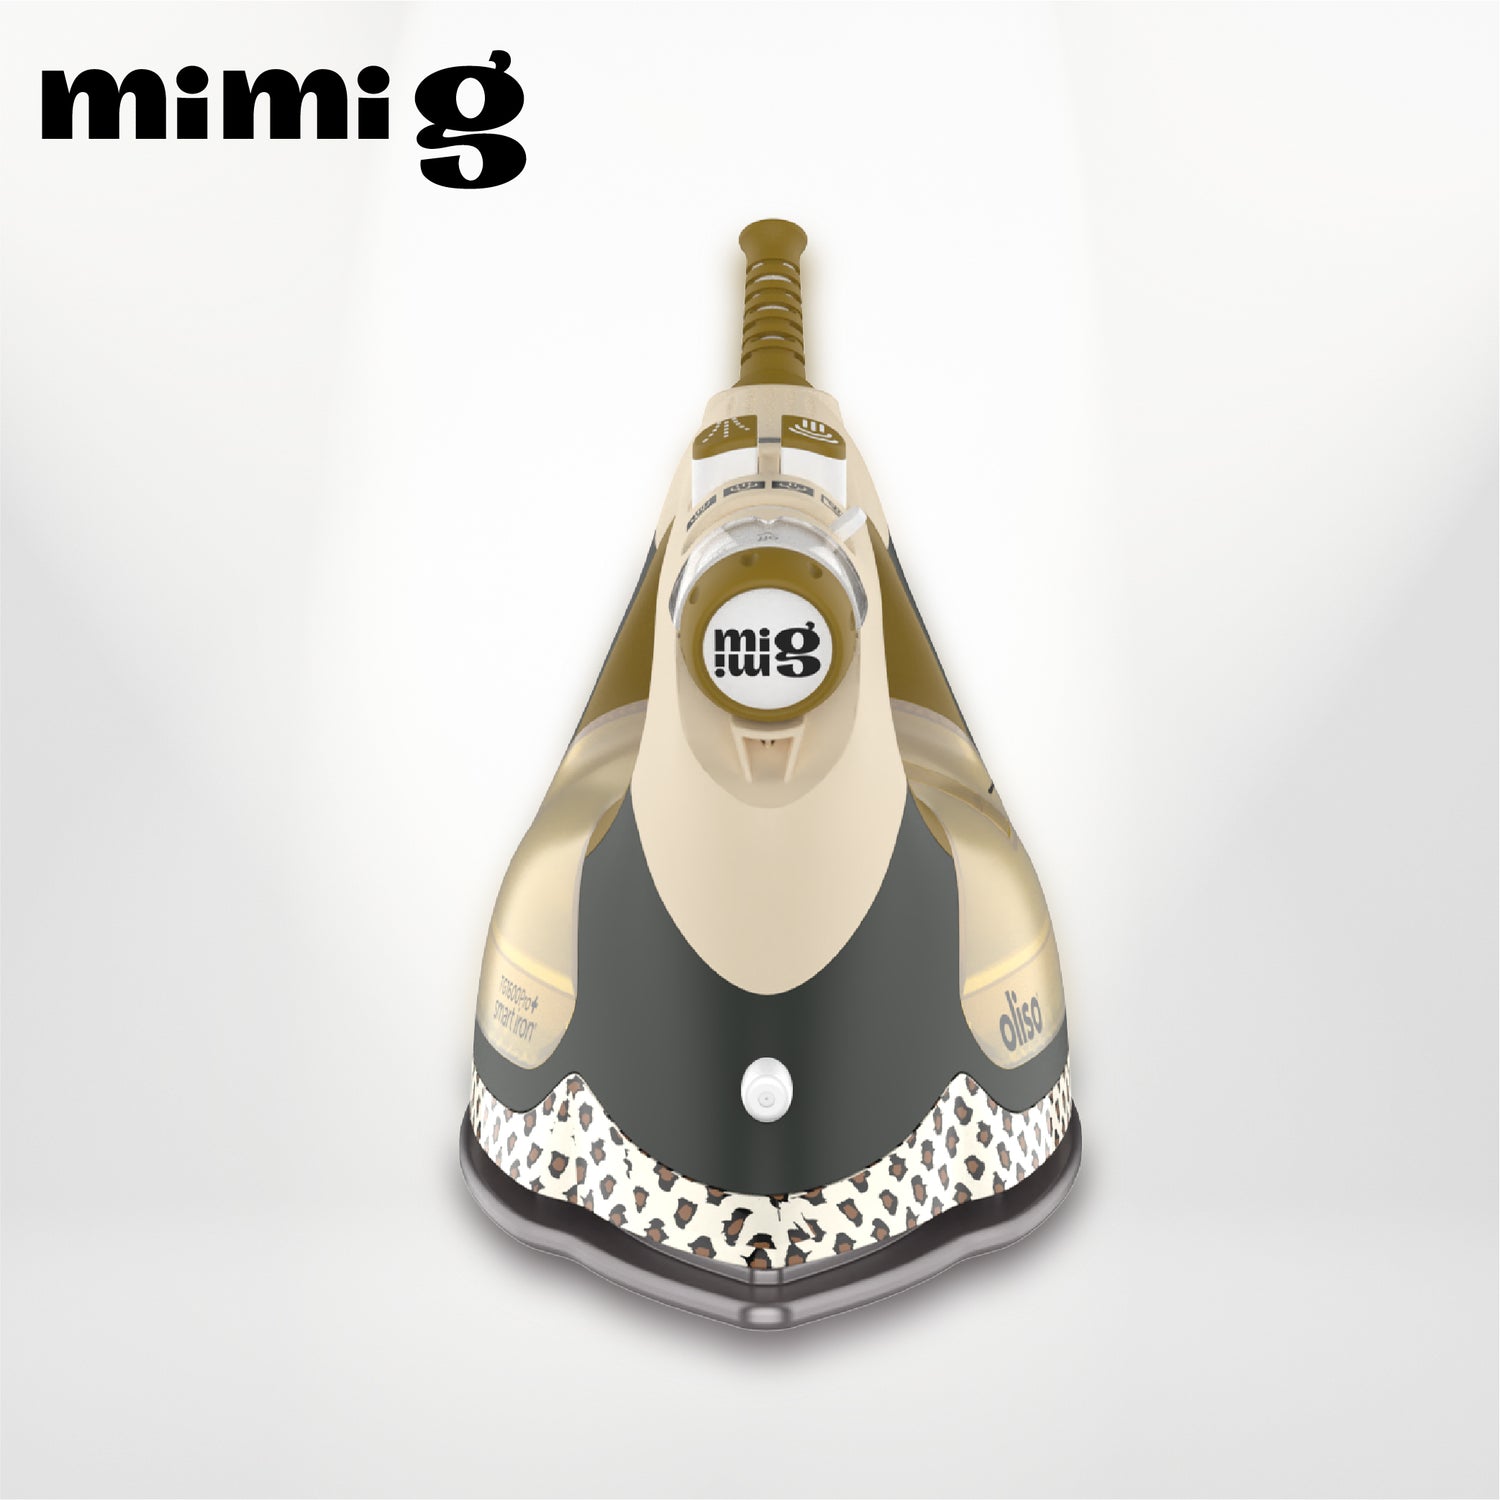 Front view of the Mimi G iron, highlighting the Mimi G logo on the fabric selector, and the leopard print on its base.